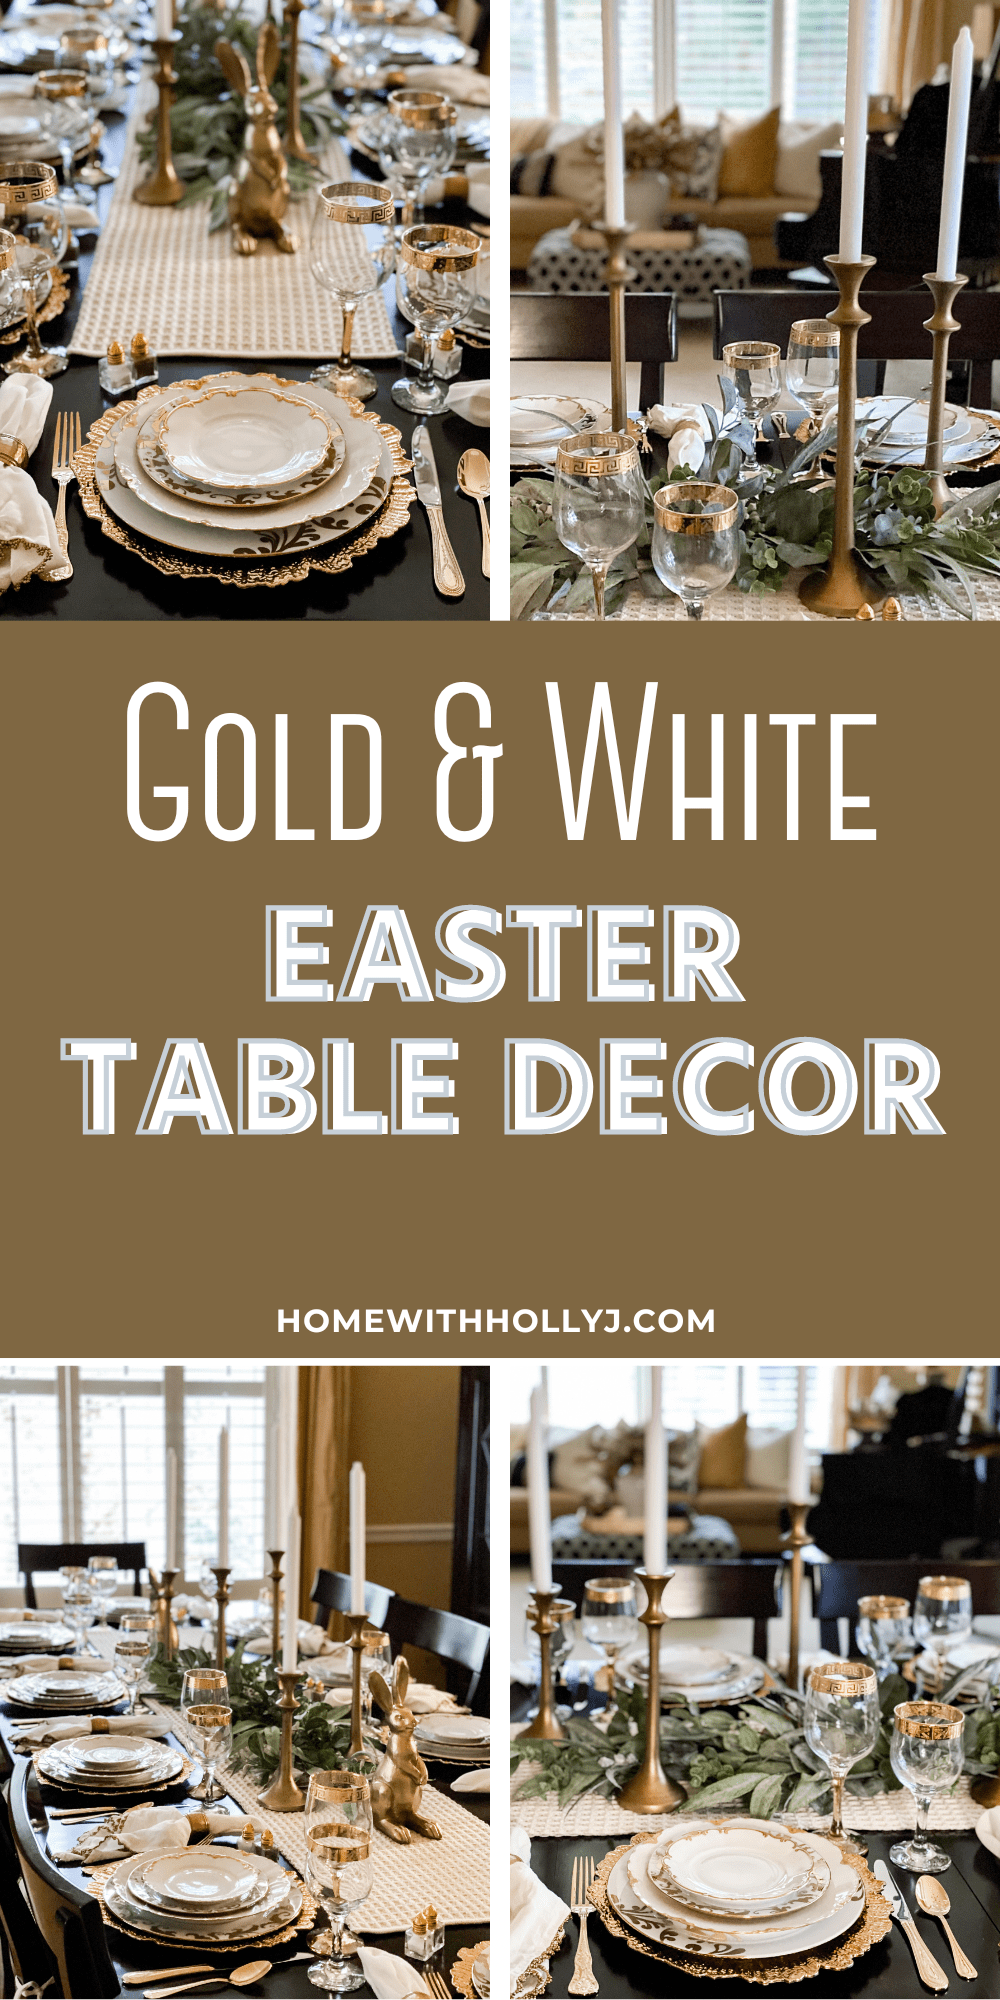 Transform your Easter gathering into a luxurious affair with stunning gold and white elegant Easter Table Decor. Learn how here.